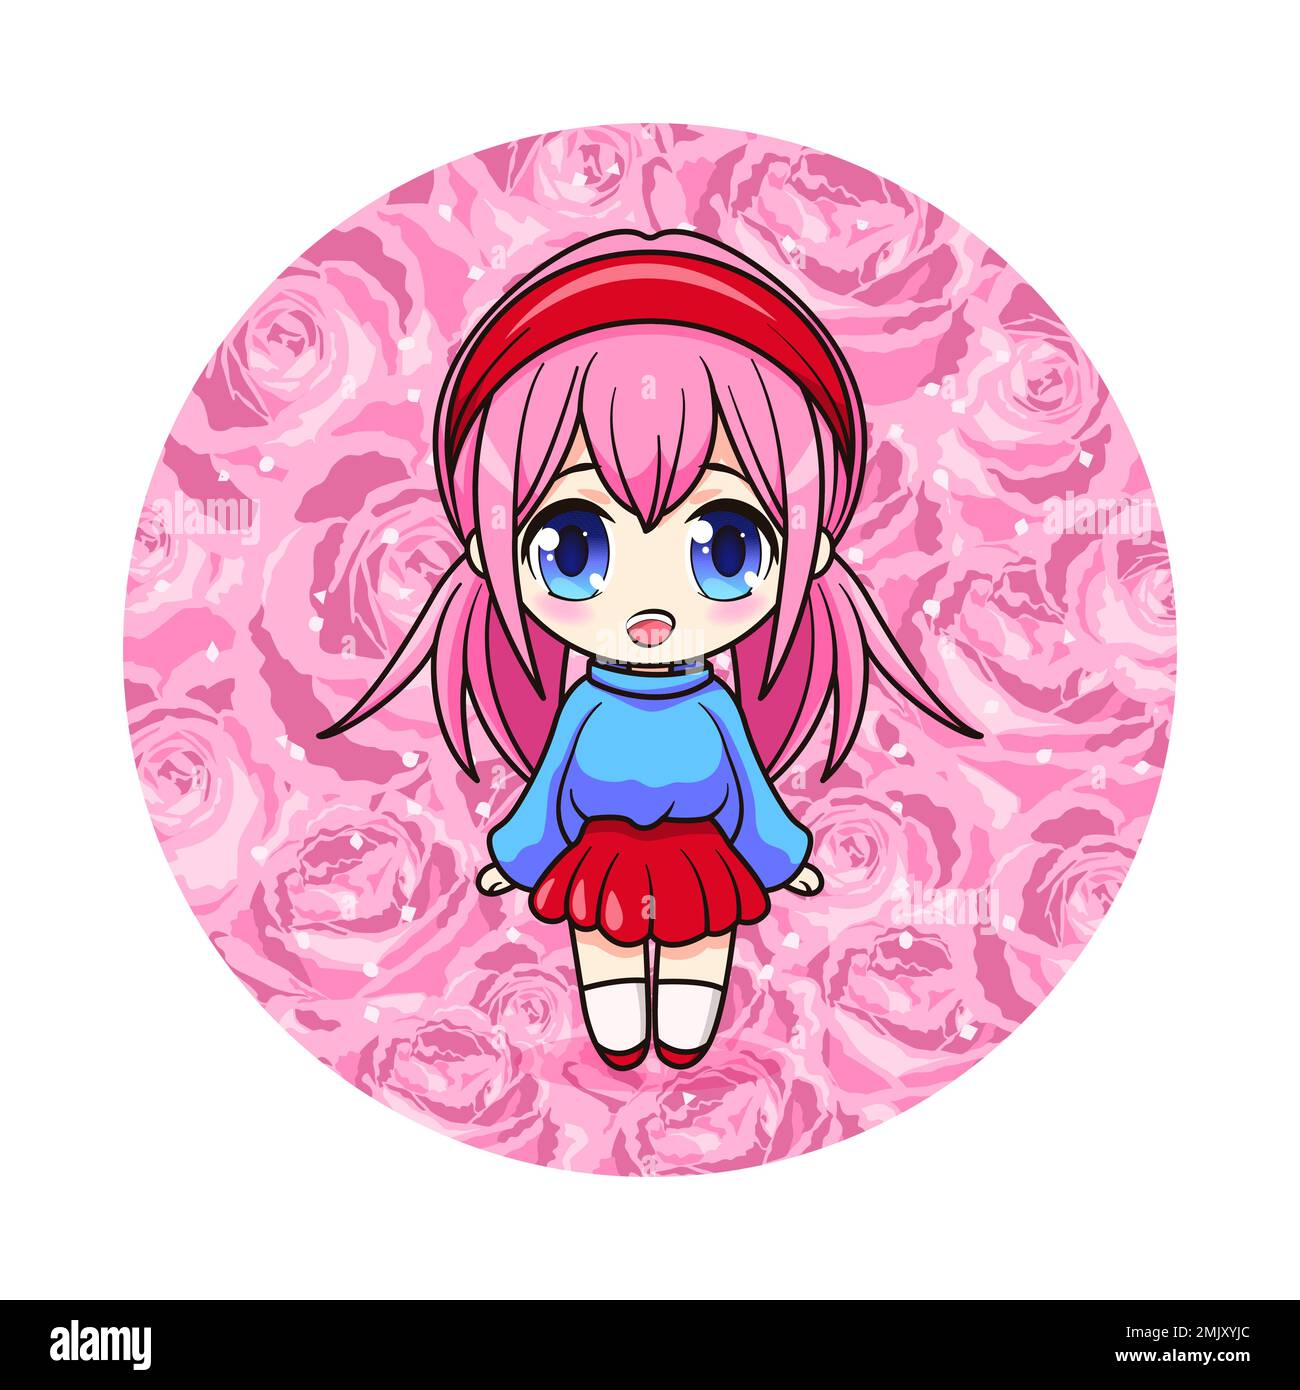 Cute and kawaii girl with pink roses. Manga chibi with flowers. Stock Vector